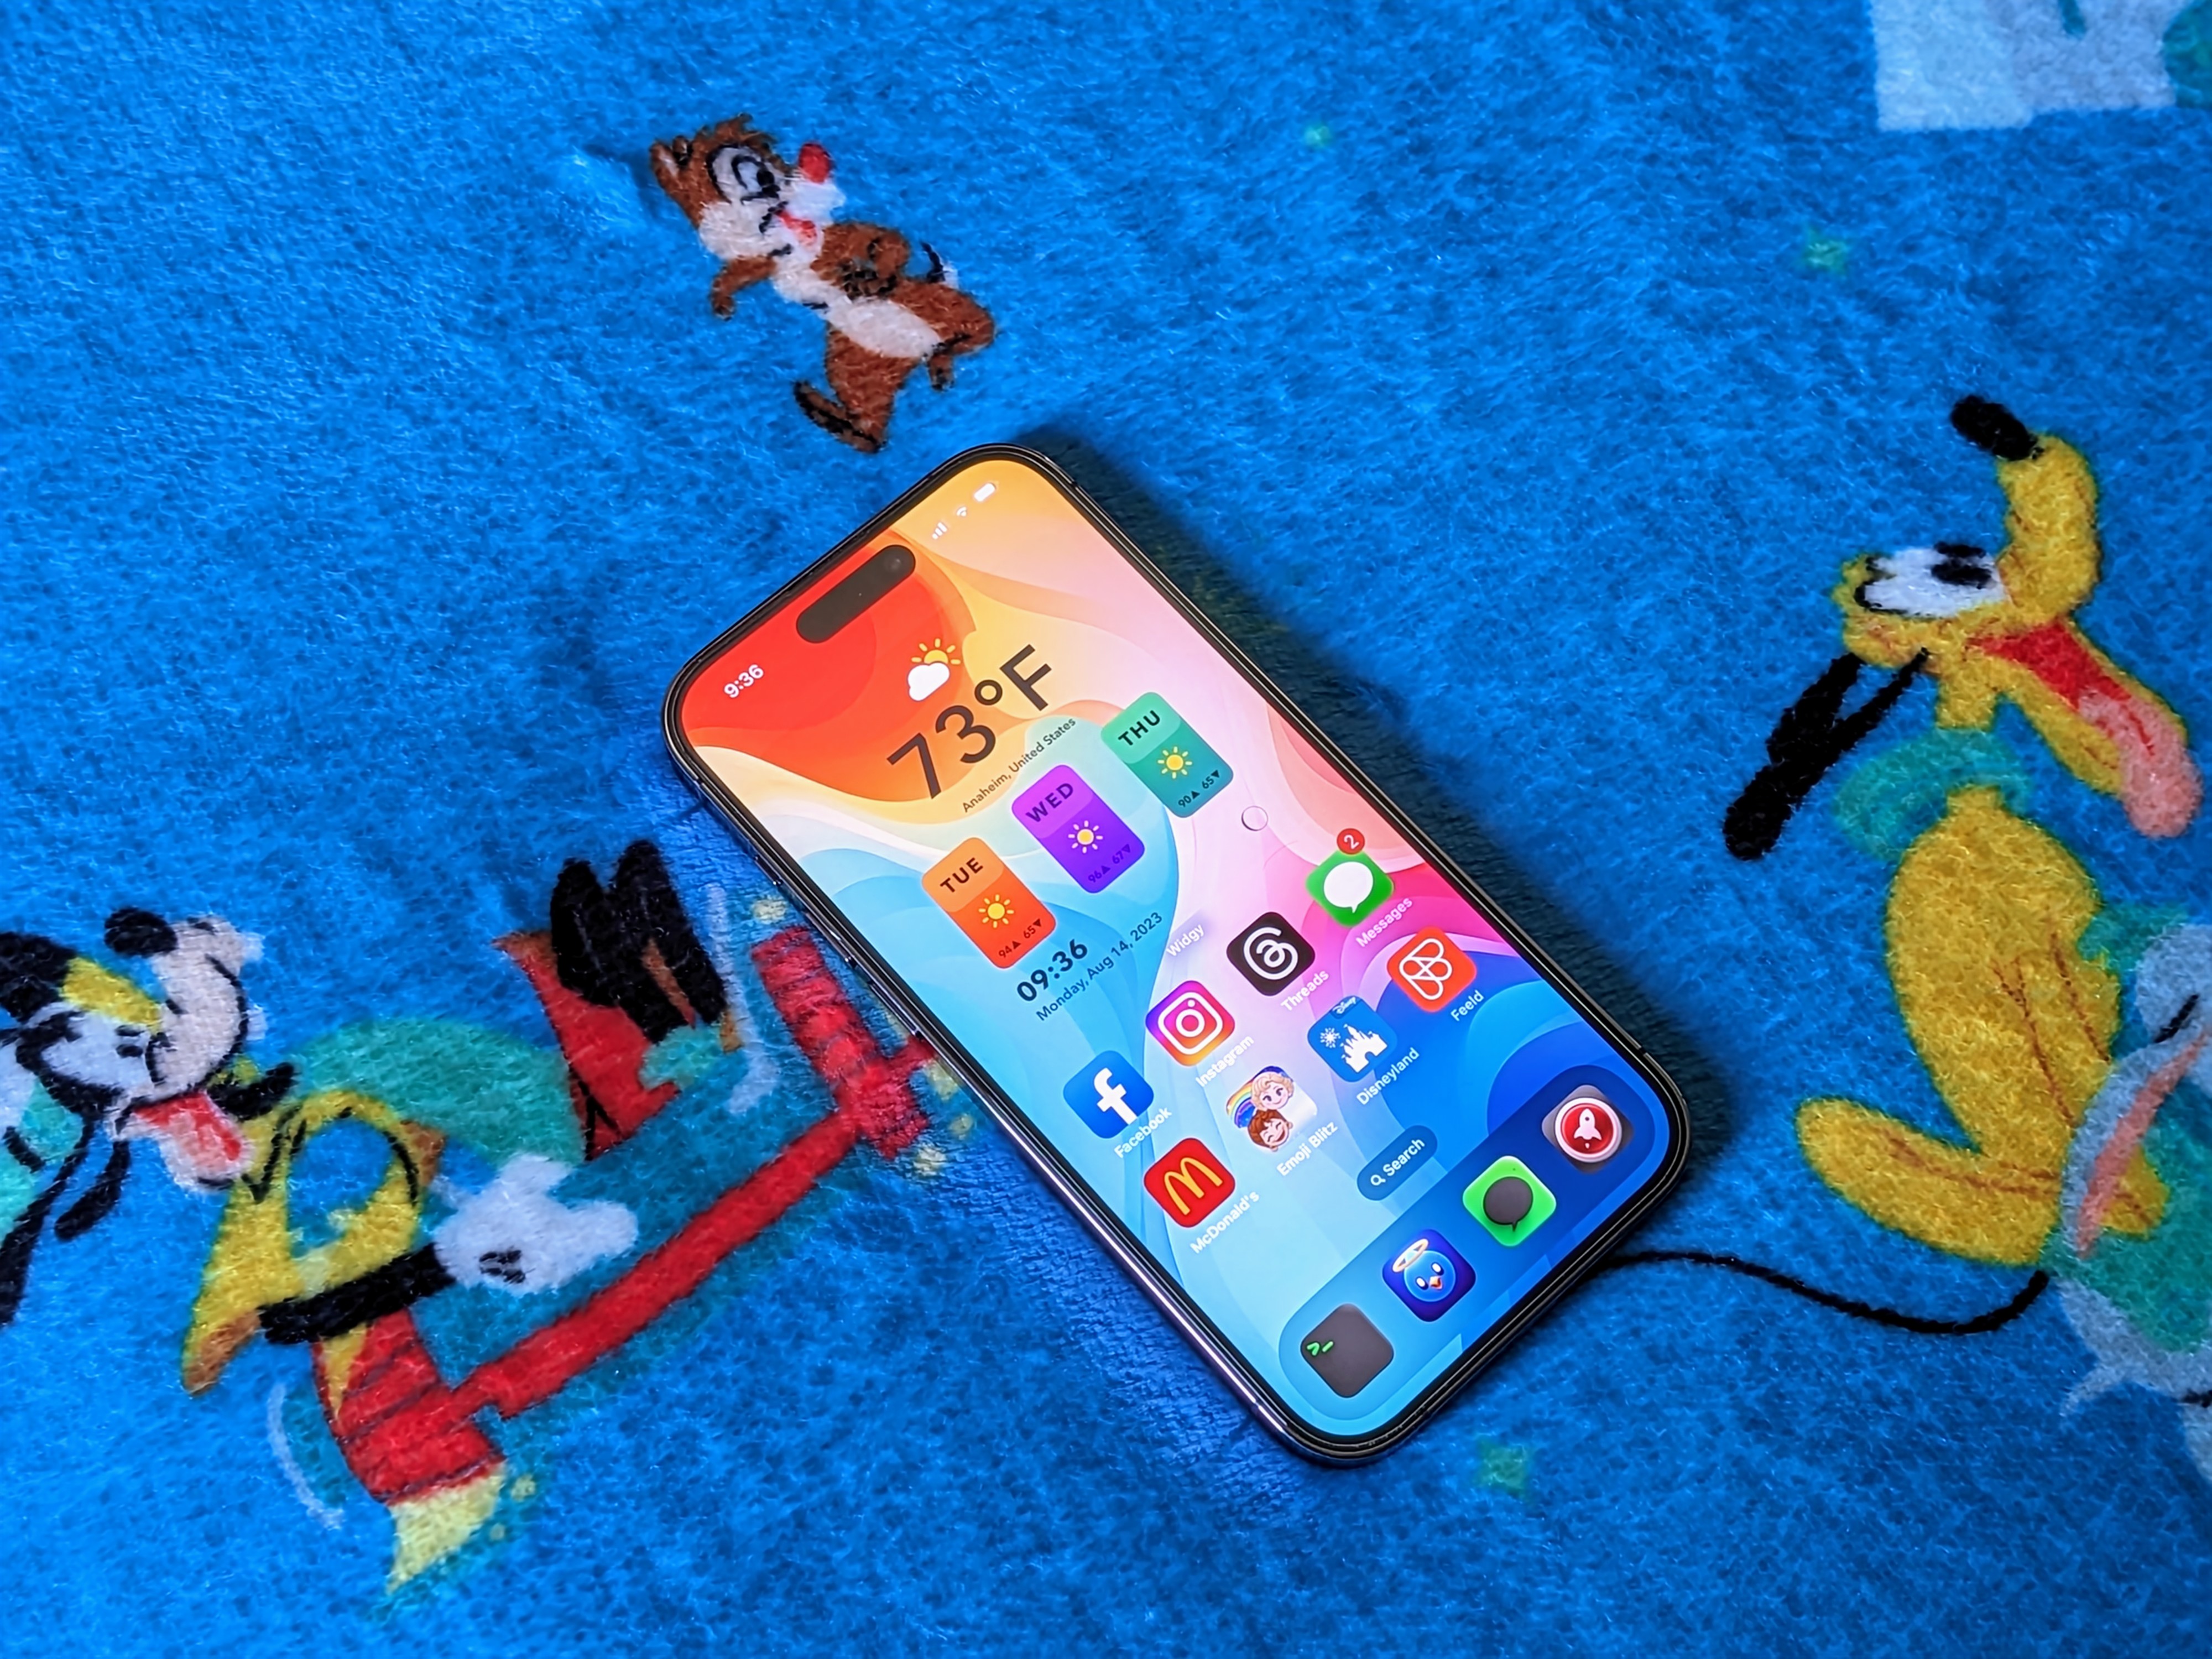 iPhone 14 Pro showing home screen while on a Disneyland blanket.